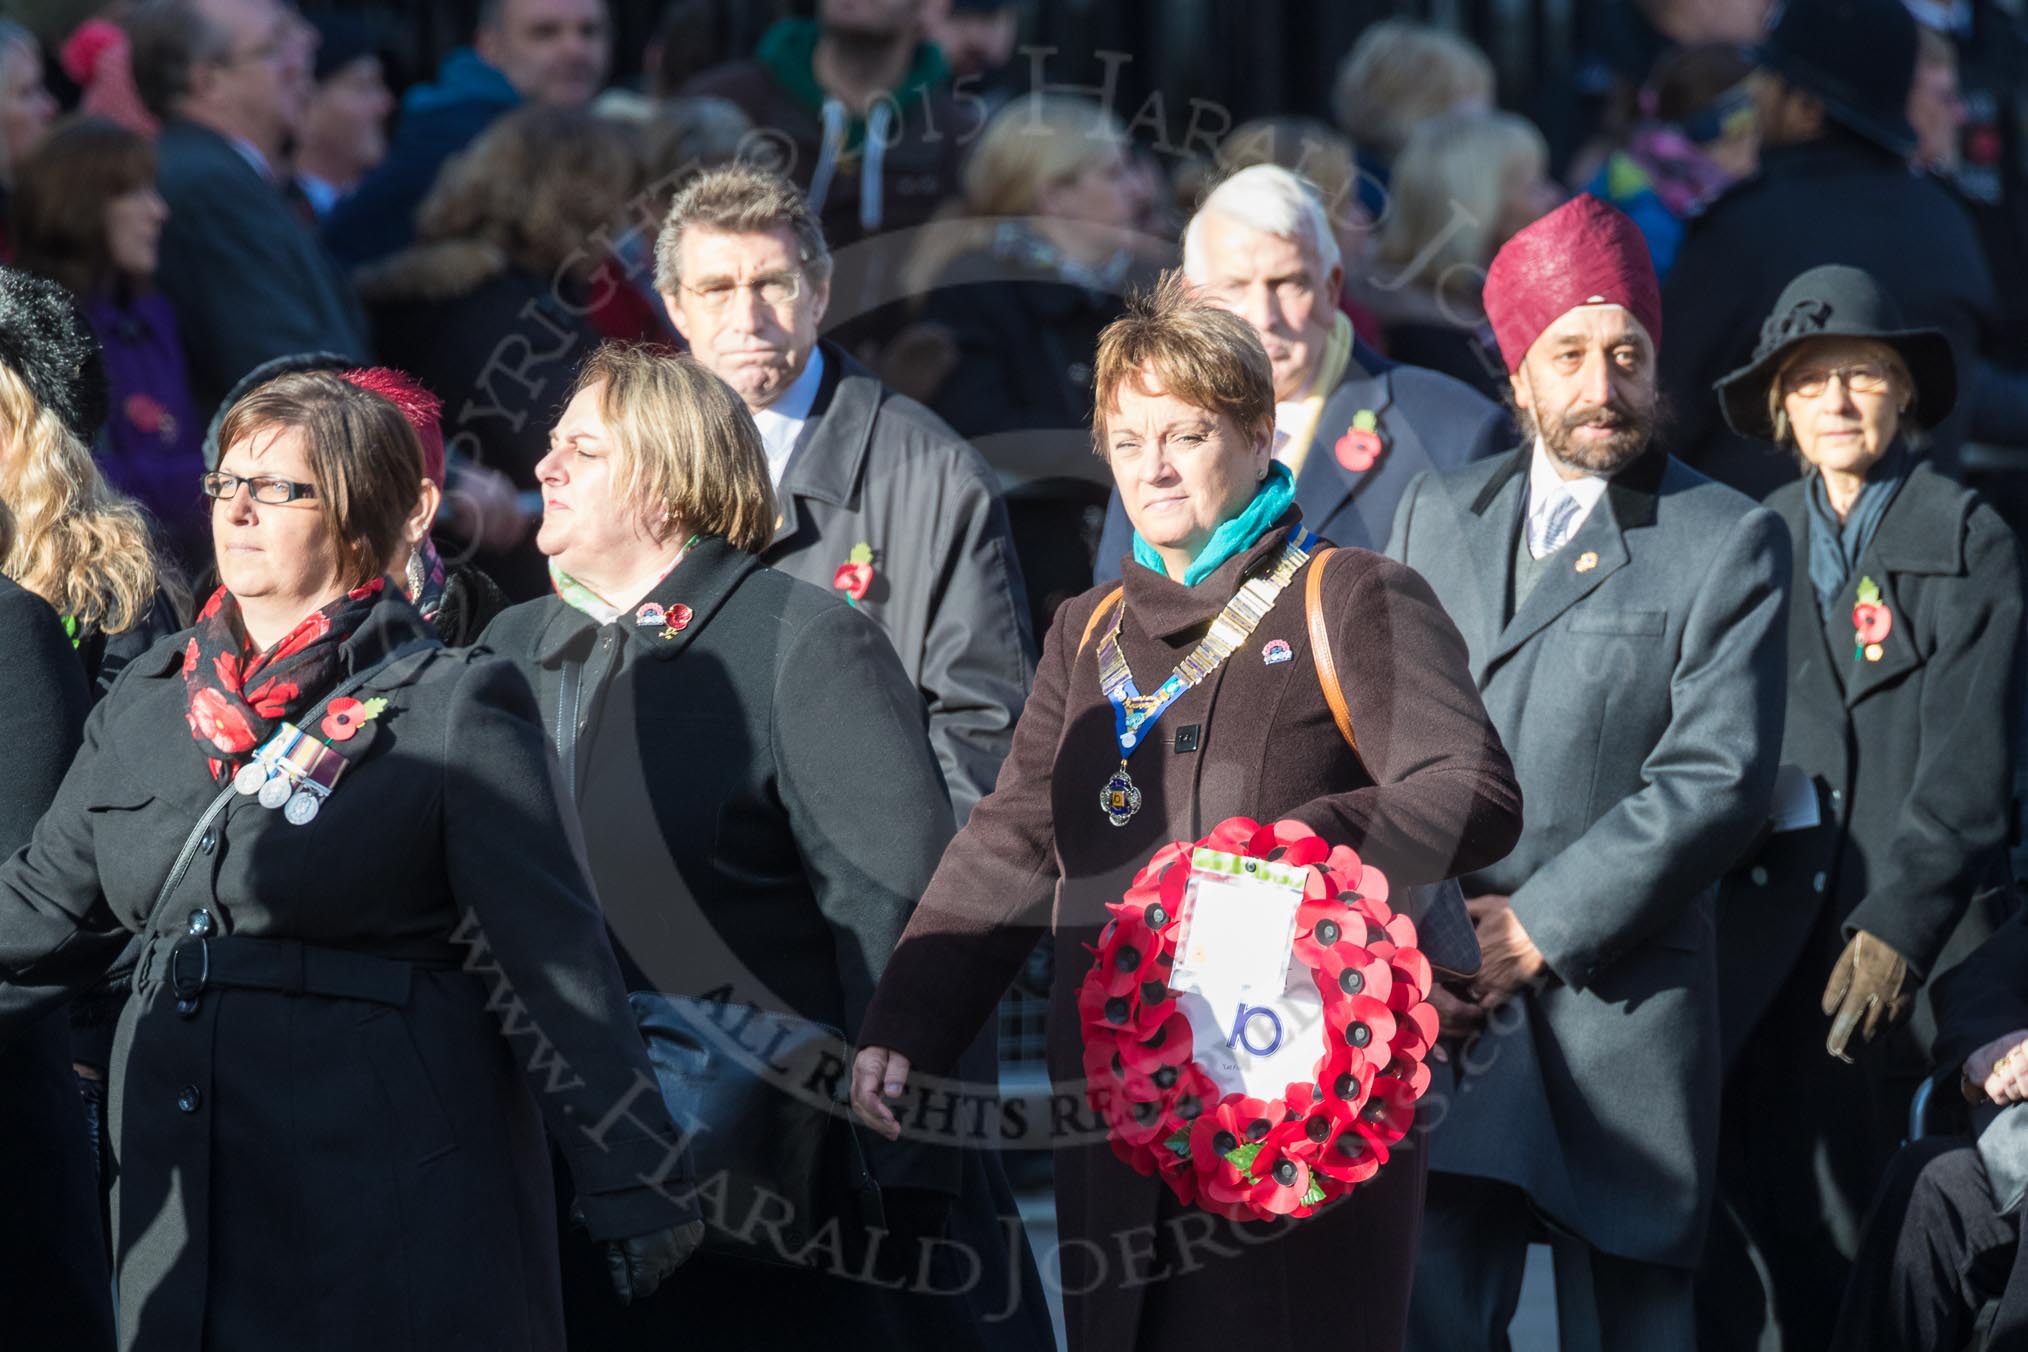 March Past, Remembrance Sunday at the Cenotaph 2016: M27 National Association of Round Tables.
Cenotaph, Whitehall, London SW1,
London,
Greater London,
United Kingdom,
on 13 November 2016 at 13:17, image #2729